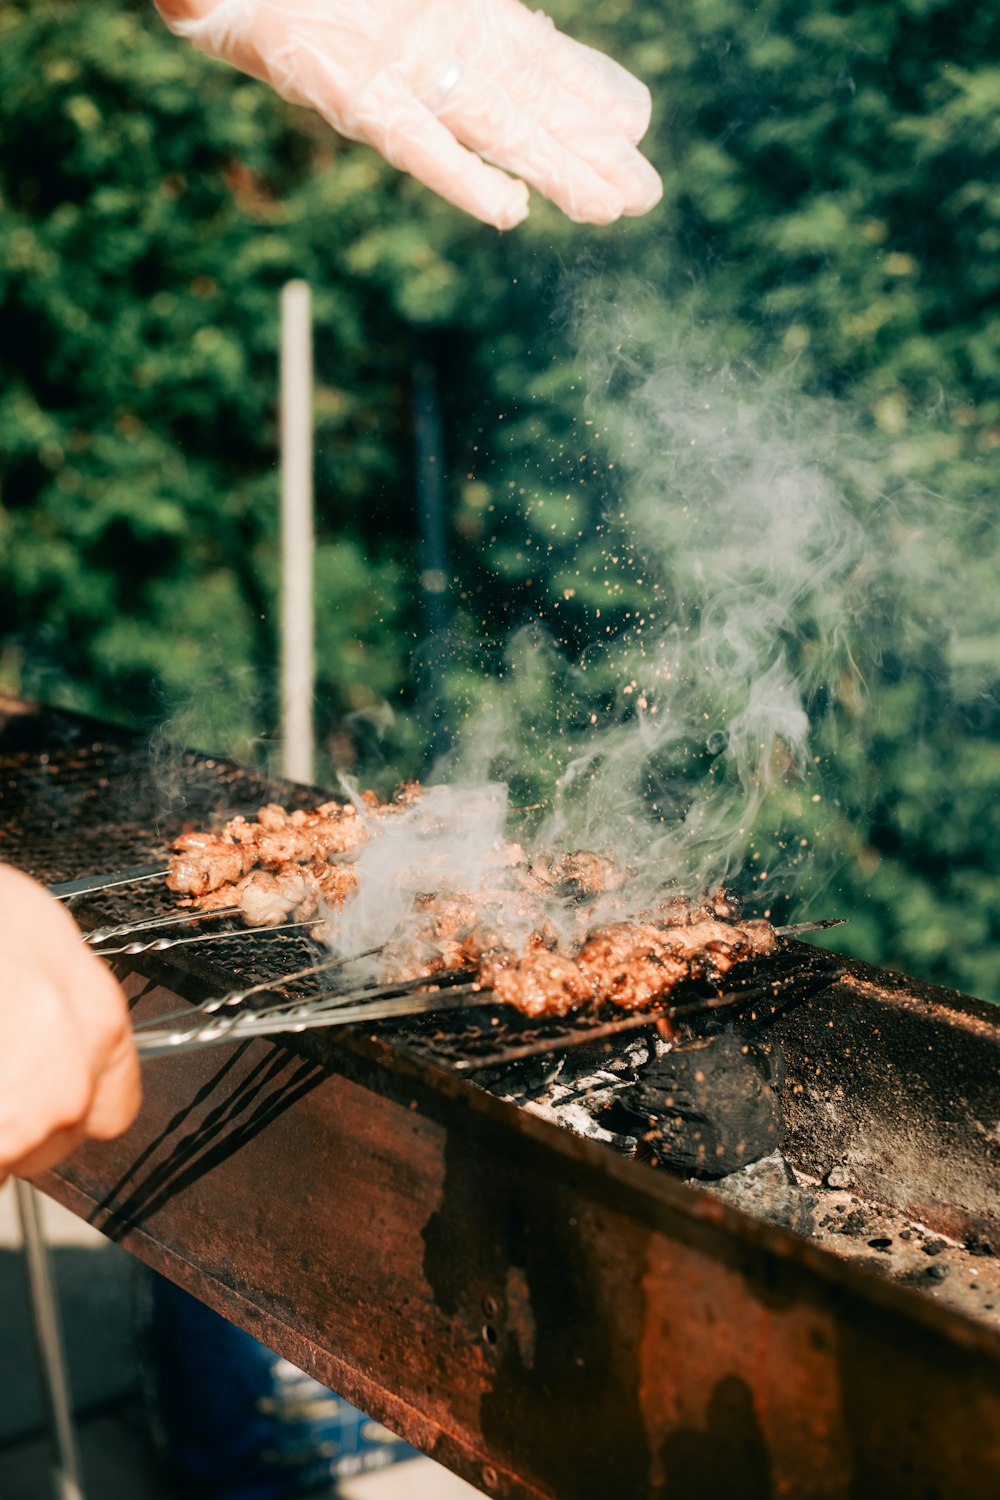 a person in white gloves cooking food on a grill